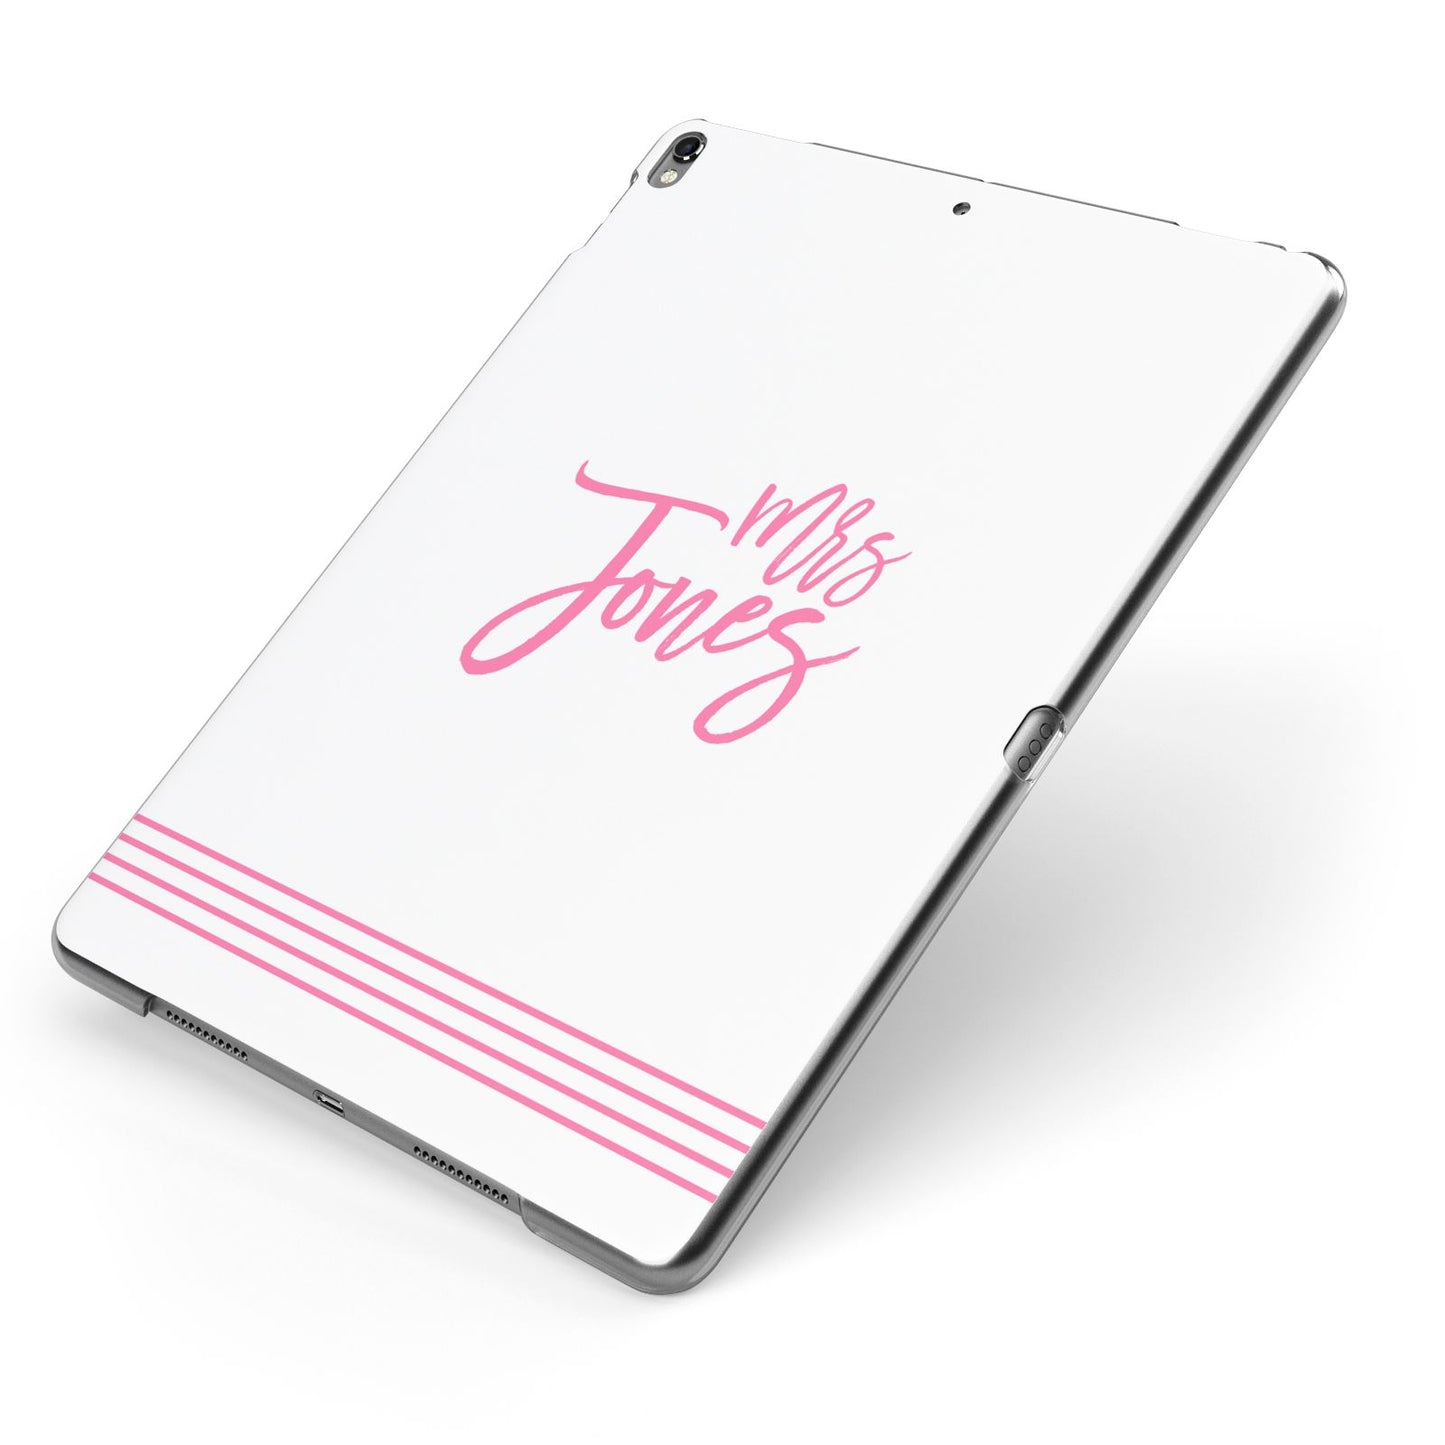 Personalised Hers Apple iPad Case on Grey iPad Side View